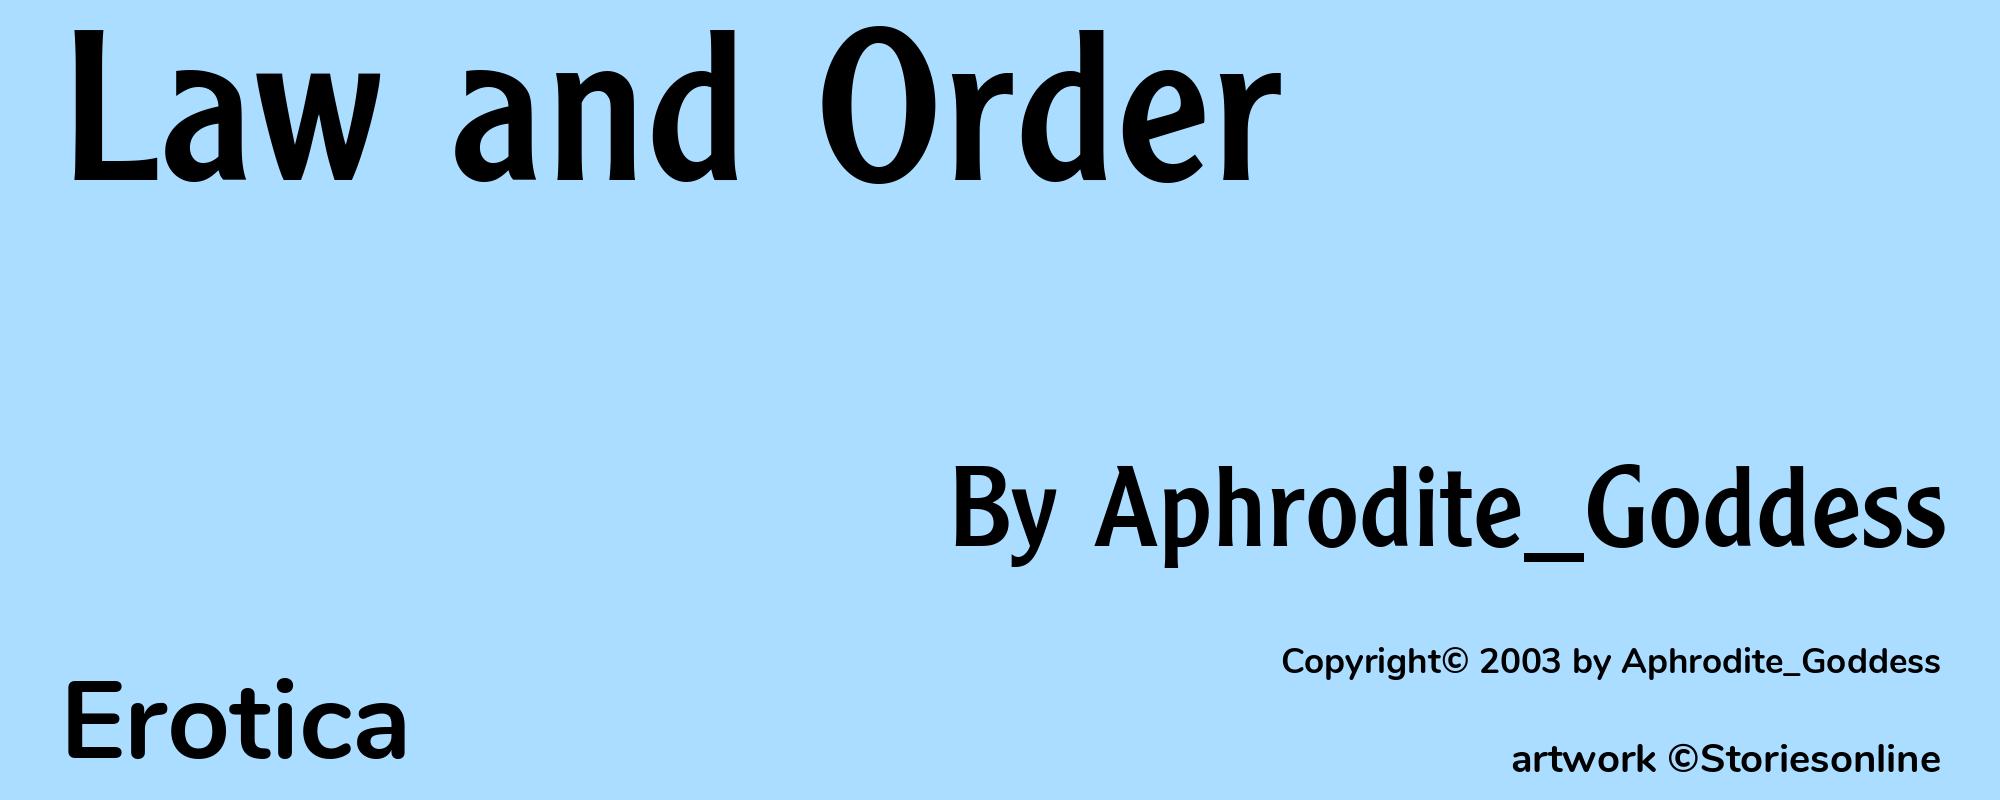 Law and Order - Cover